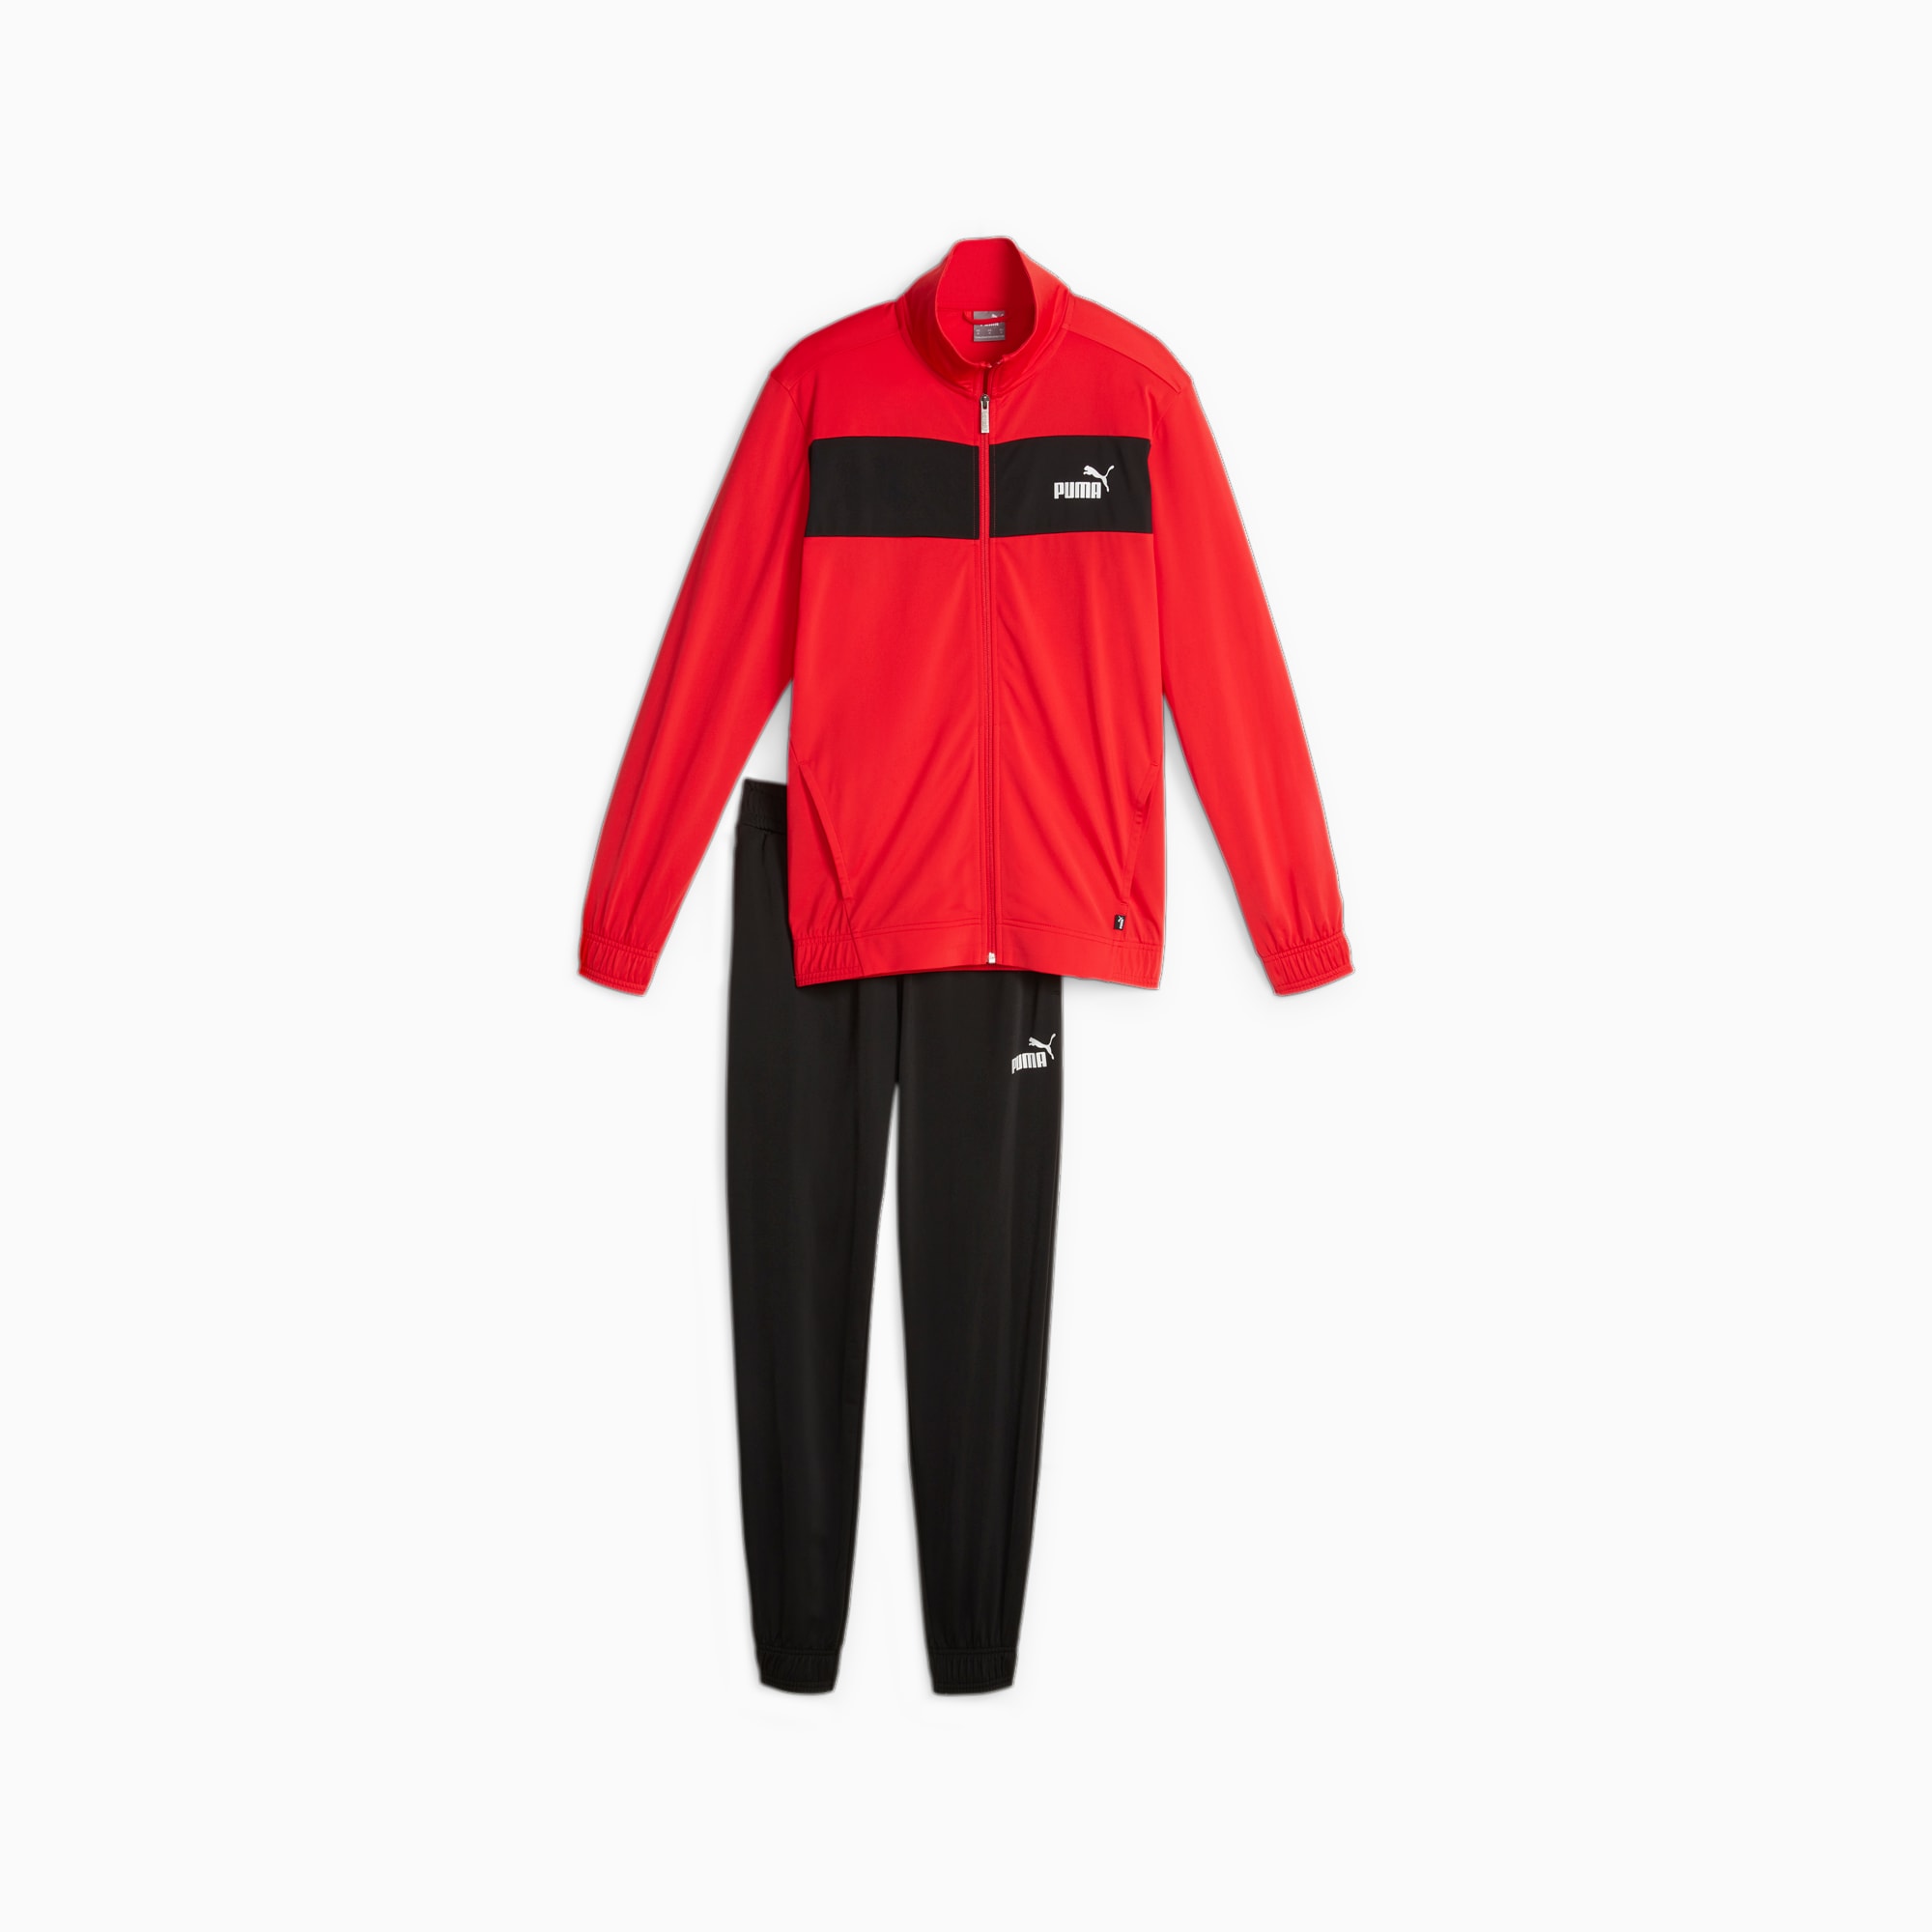 PUMA Men's Poly Tracksuit, For All Time Red, Size XS, Clothing